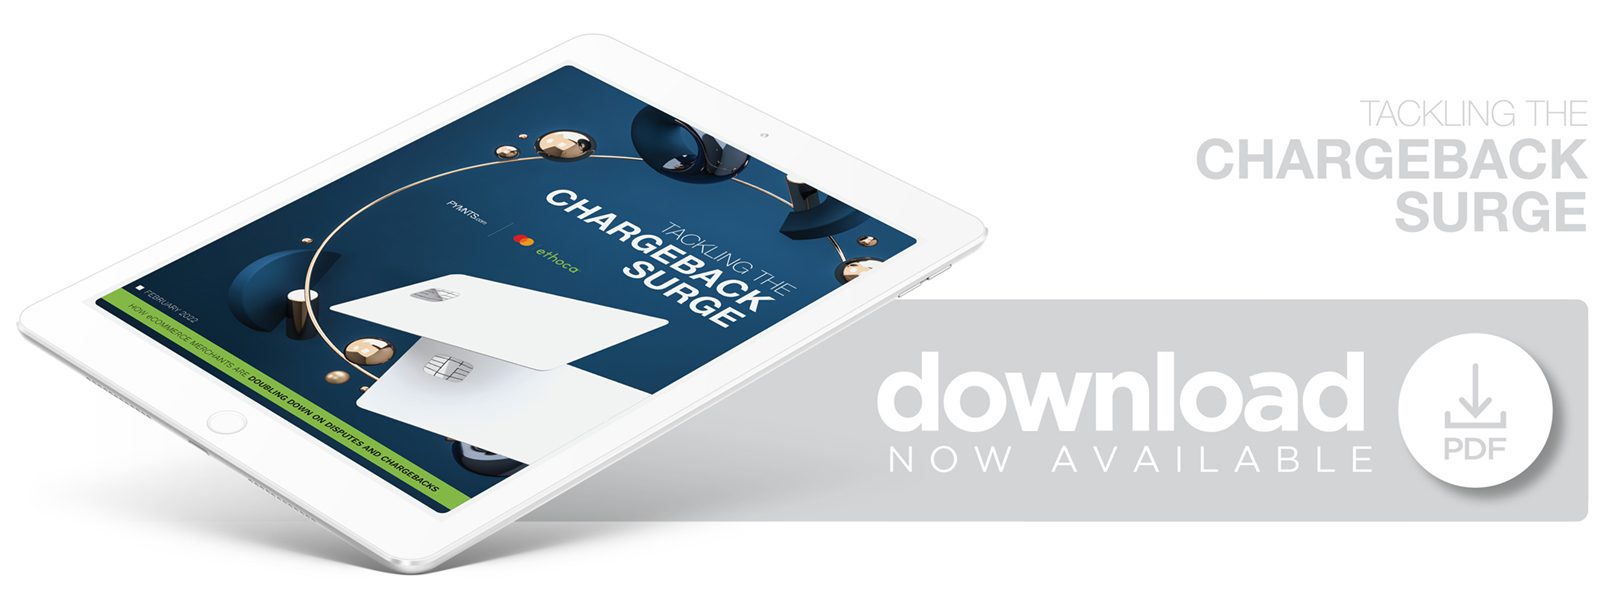 Tackling The Chargeback Surge February 2022 - Discover how eCommerce merchants in Australia, the United Kingdom and the United States are tackling surges in chargebacks